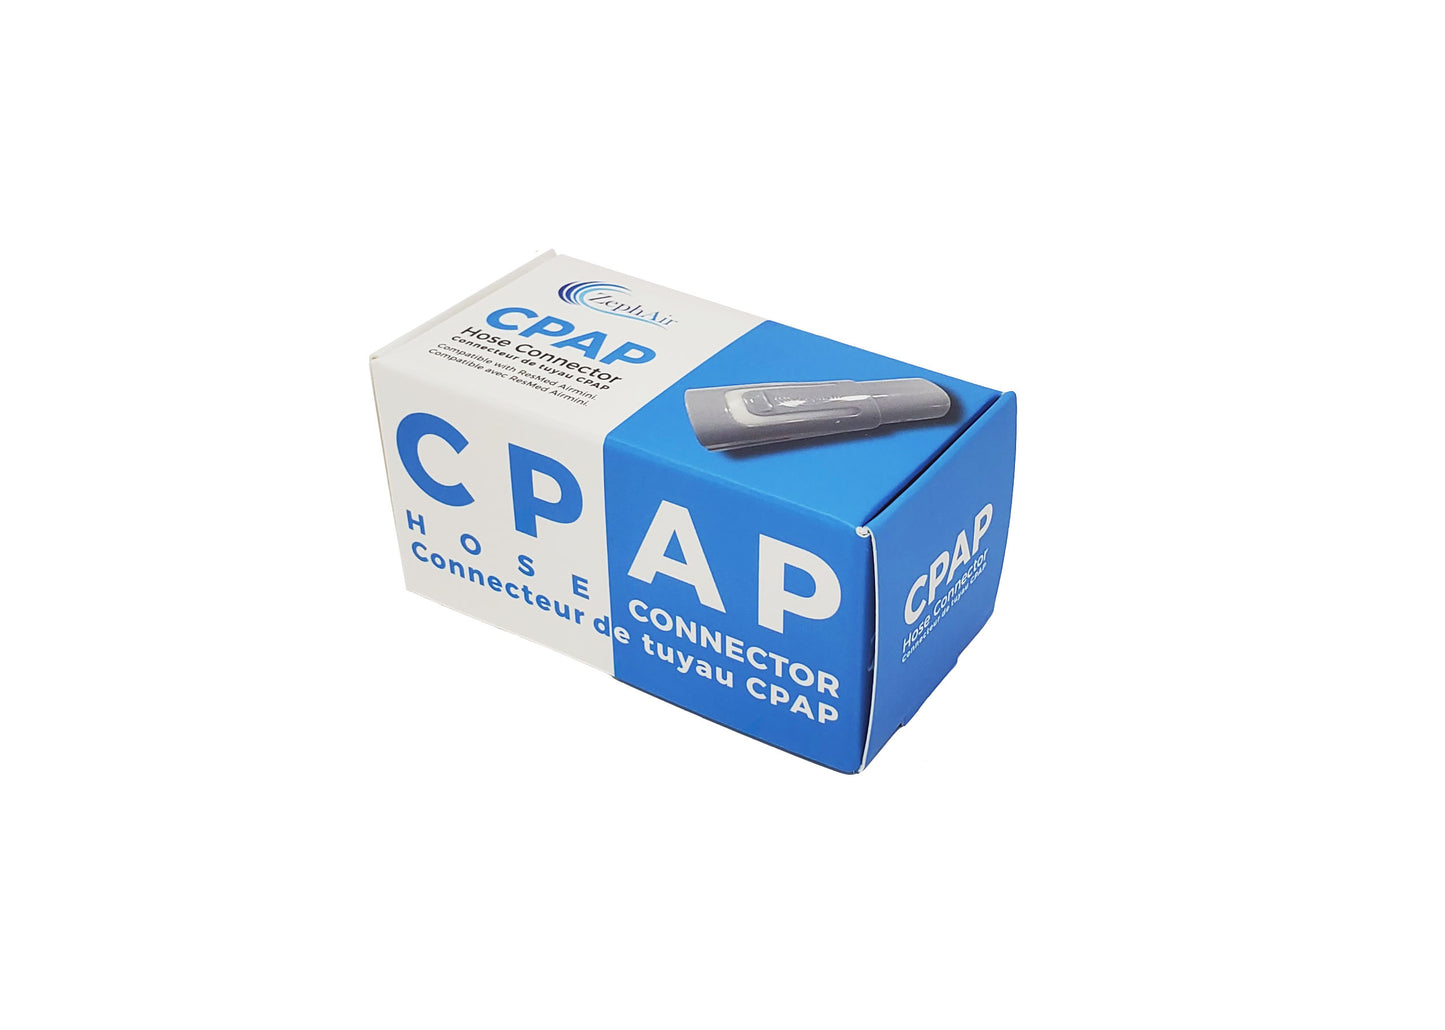 Box that the ZephAir CPAP hose connector comes in